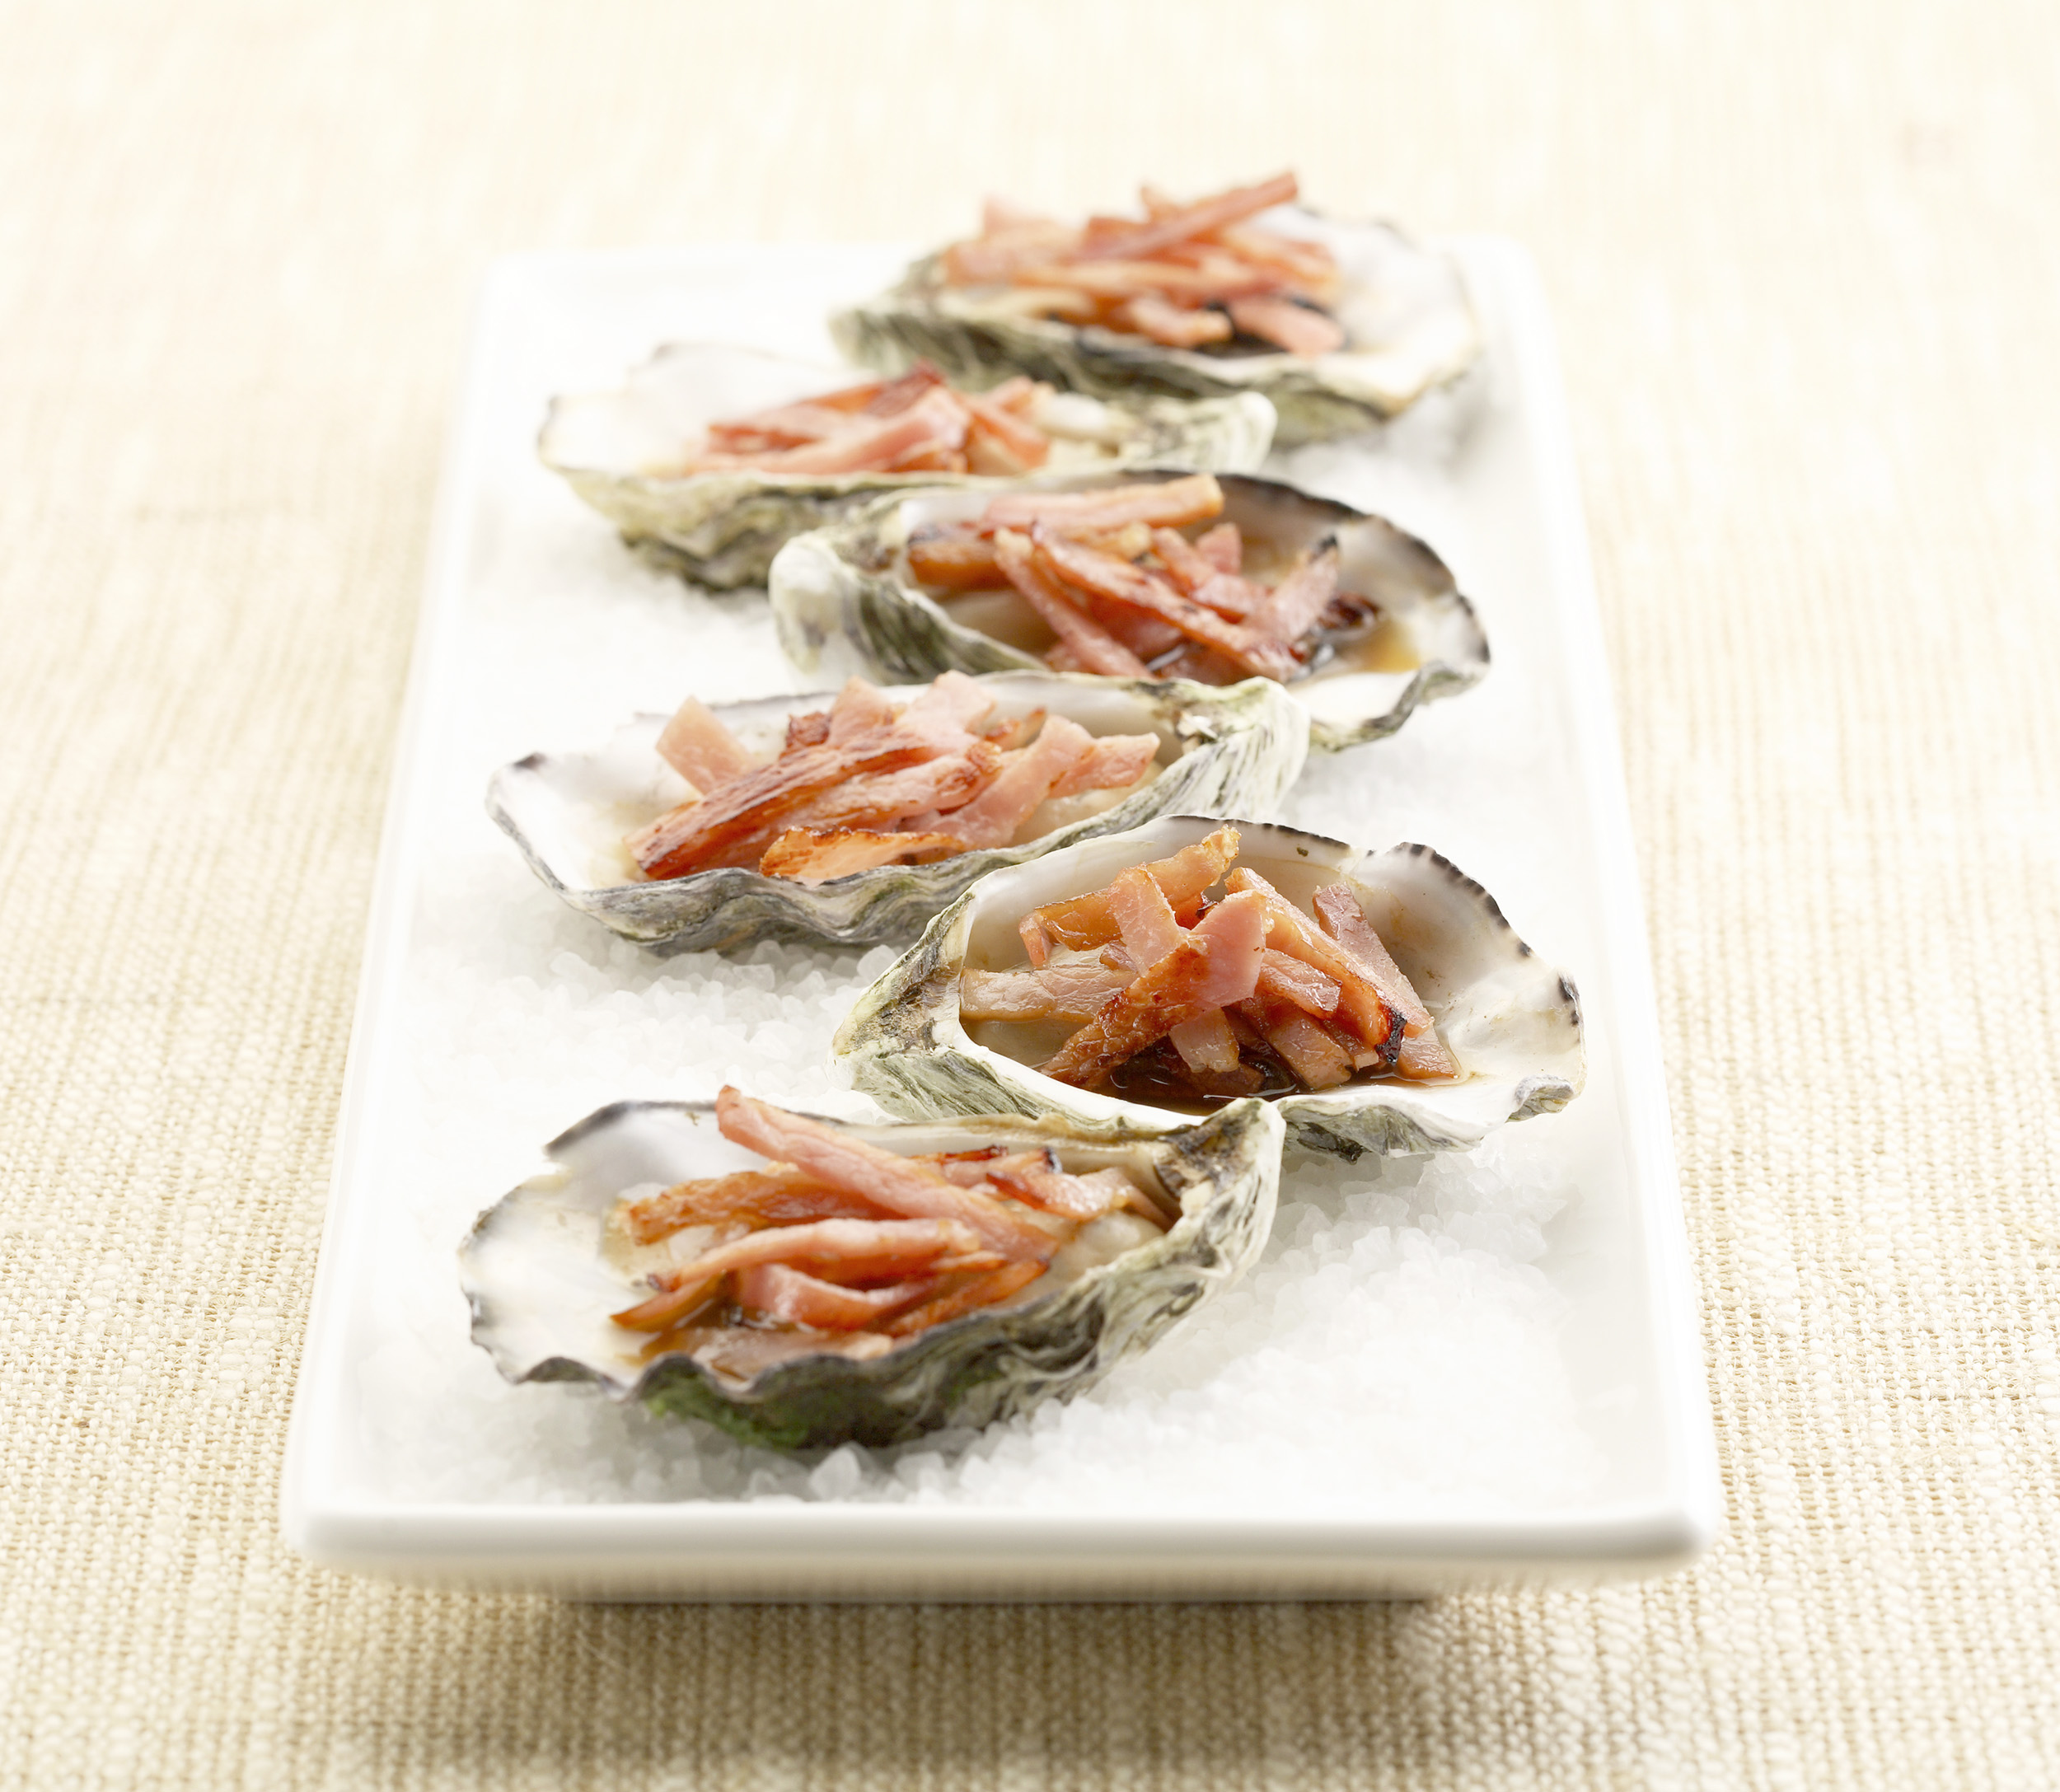 Plated Oysters Kilpatrick on a cream background. Paul Scott, food photography.